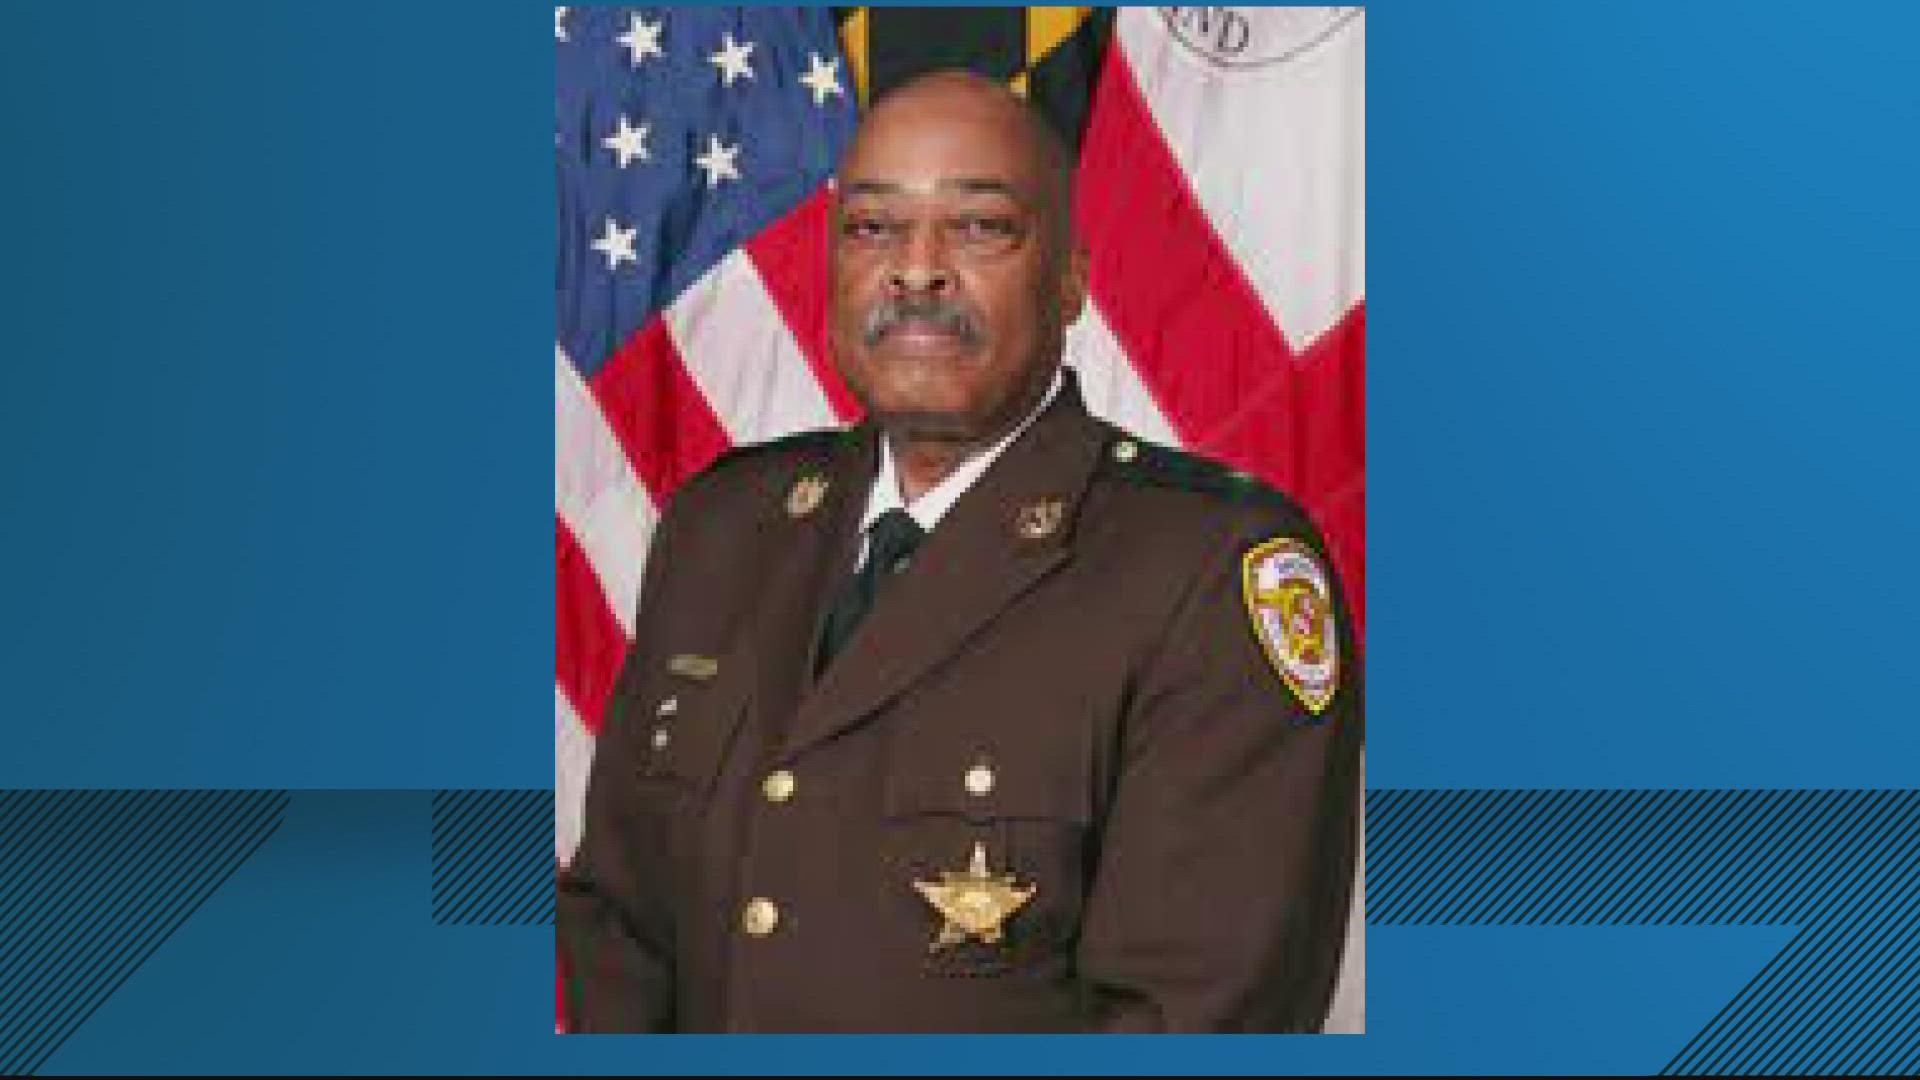 We join the Prince George's County community in mourning Sheriff High's loss -- and thanking him for his decades of service.